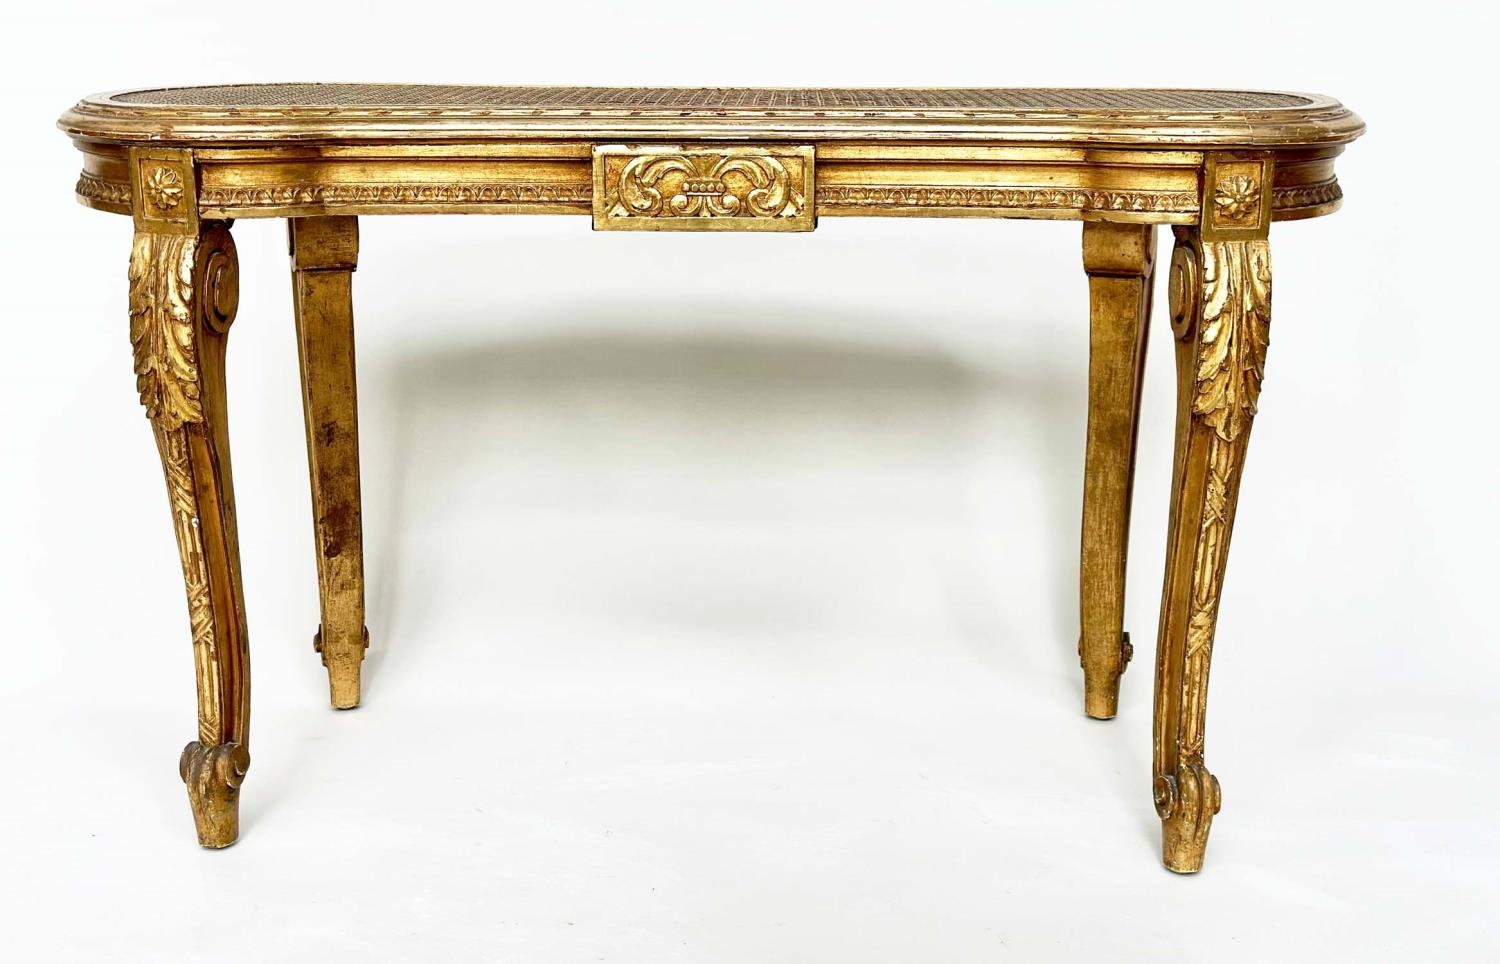 WINDOW SEAT, late 19th century French Louis XVI style giltwood with cane seat and carved tapering